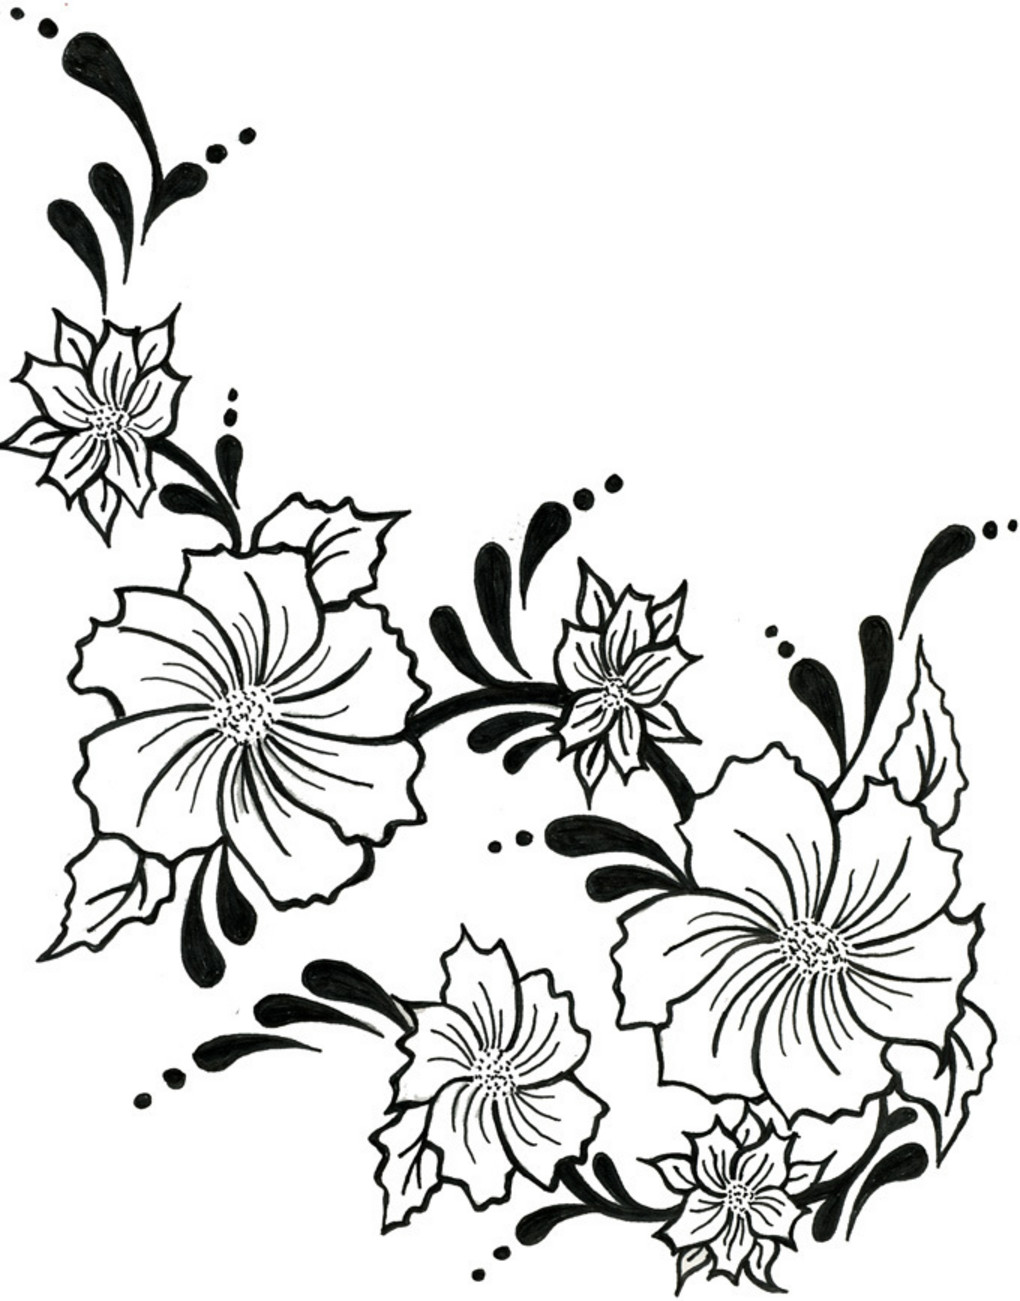 Tribal Hibiscus Flower Tattoo On Back: Real Photo, Pictures ...